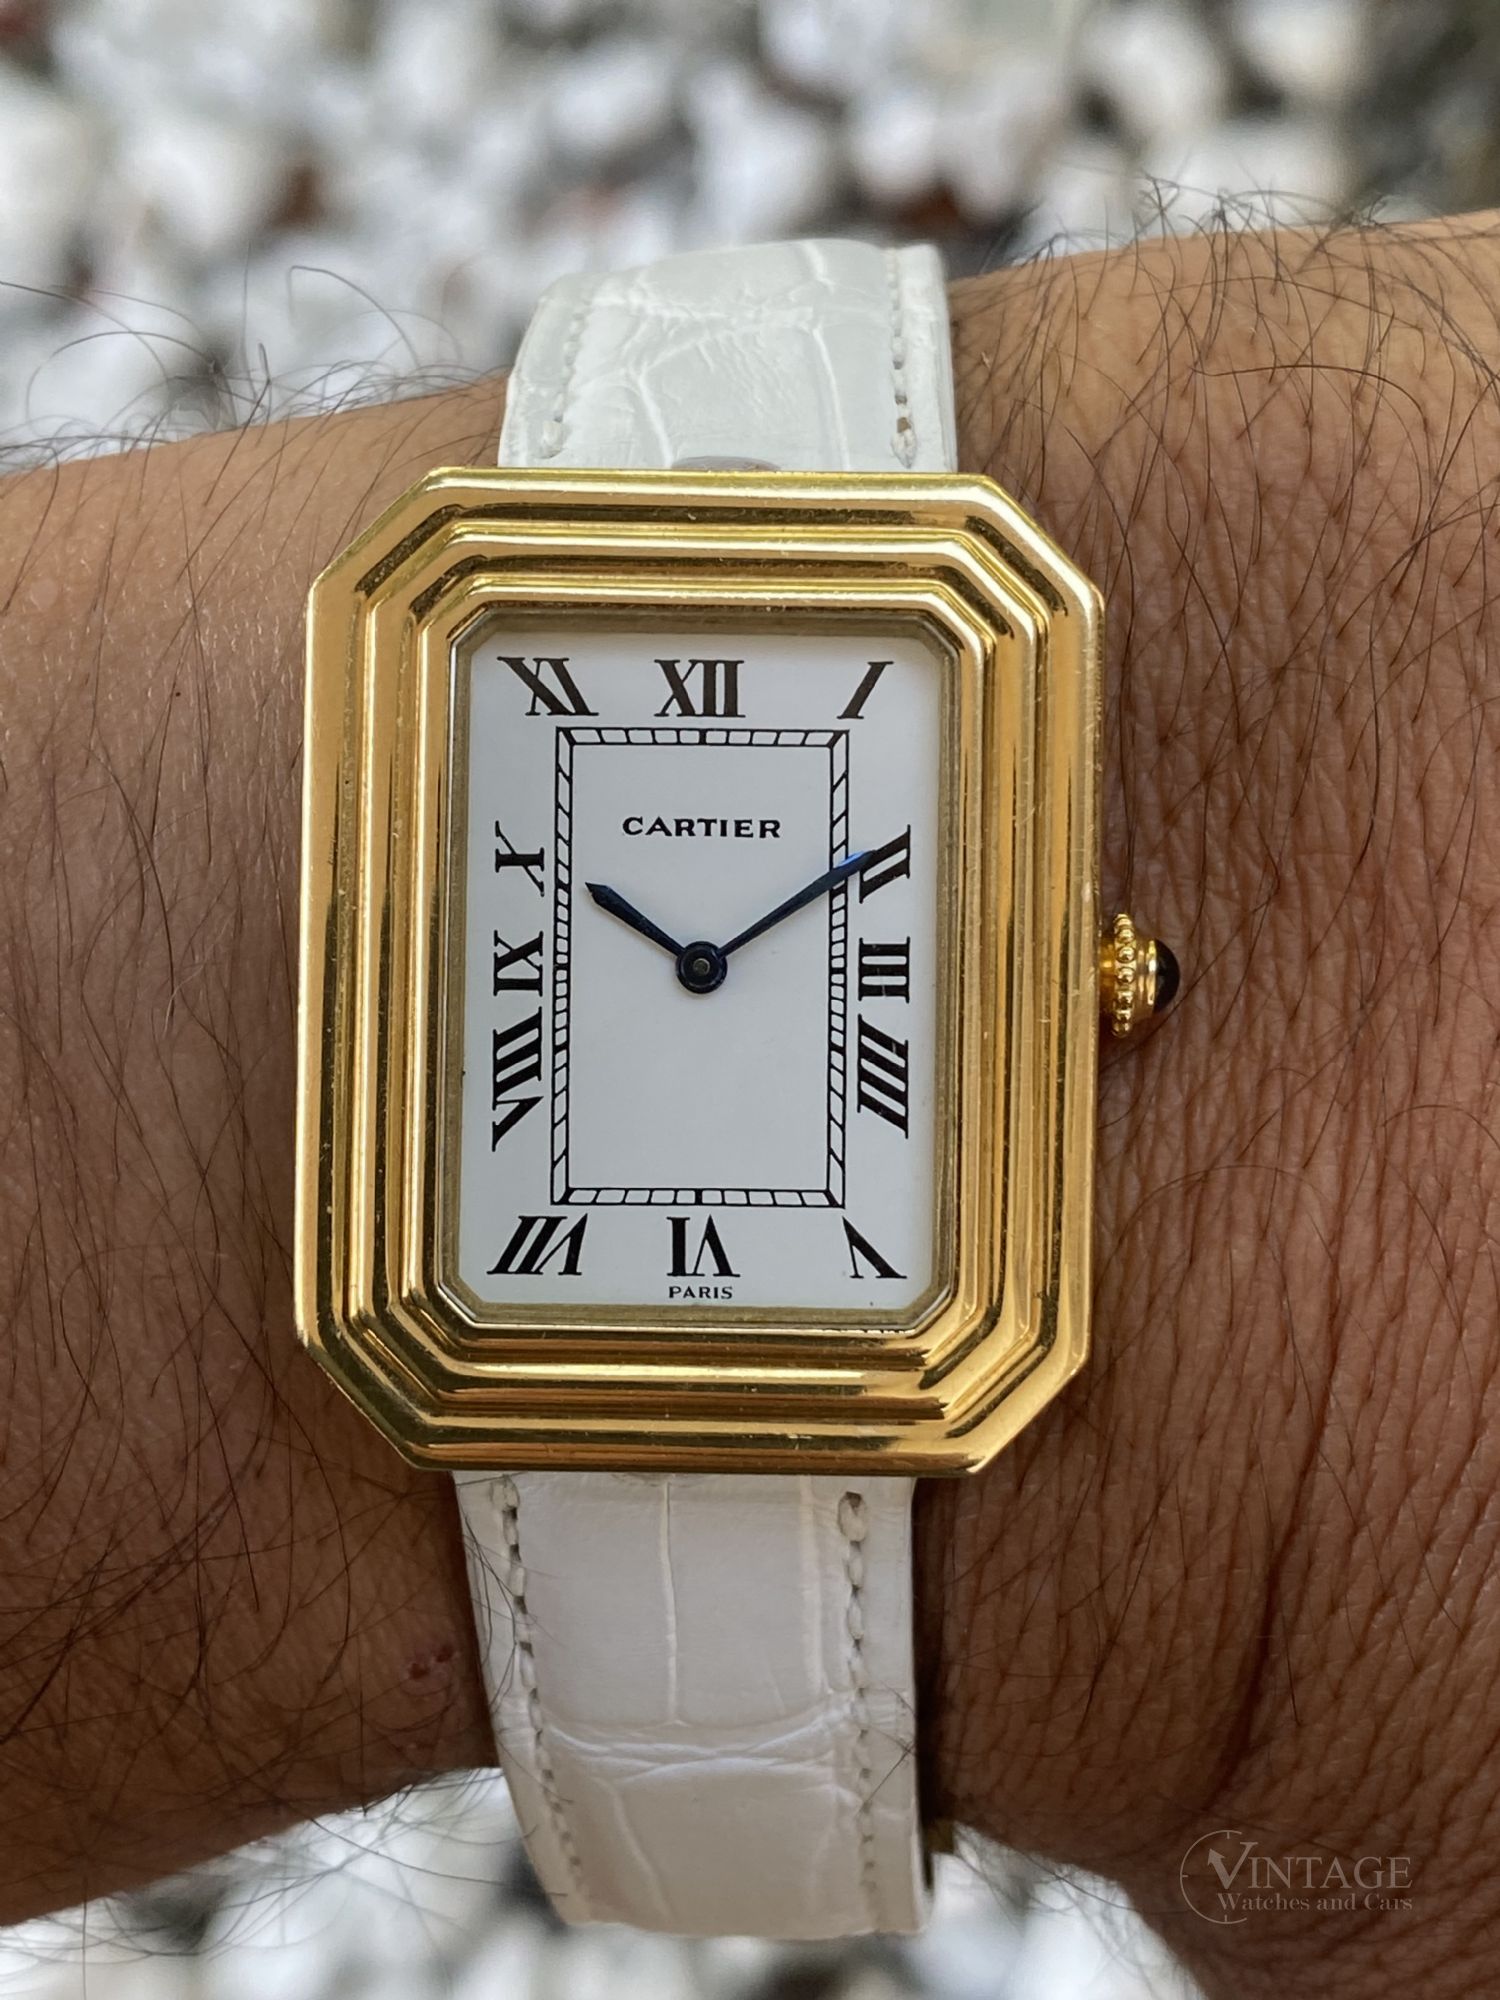 Vintage Watches & Cars - Watches | Cartier - Rare 1970s Cartier 